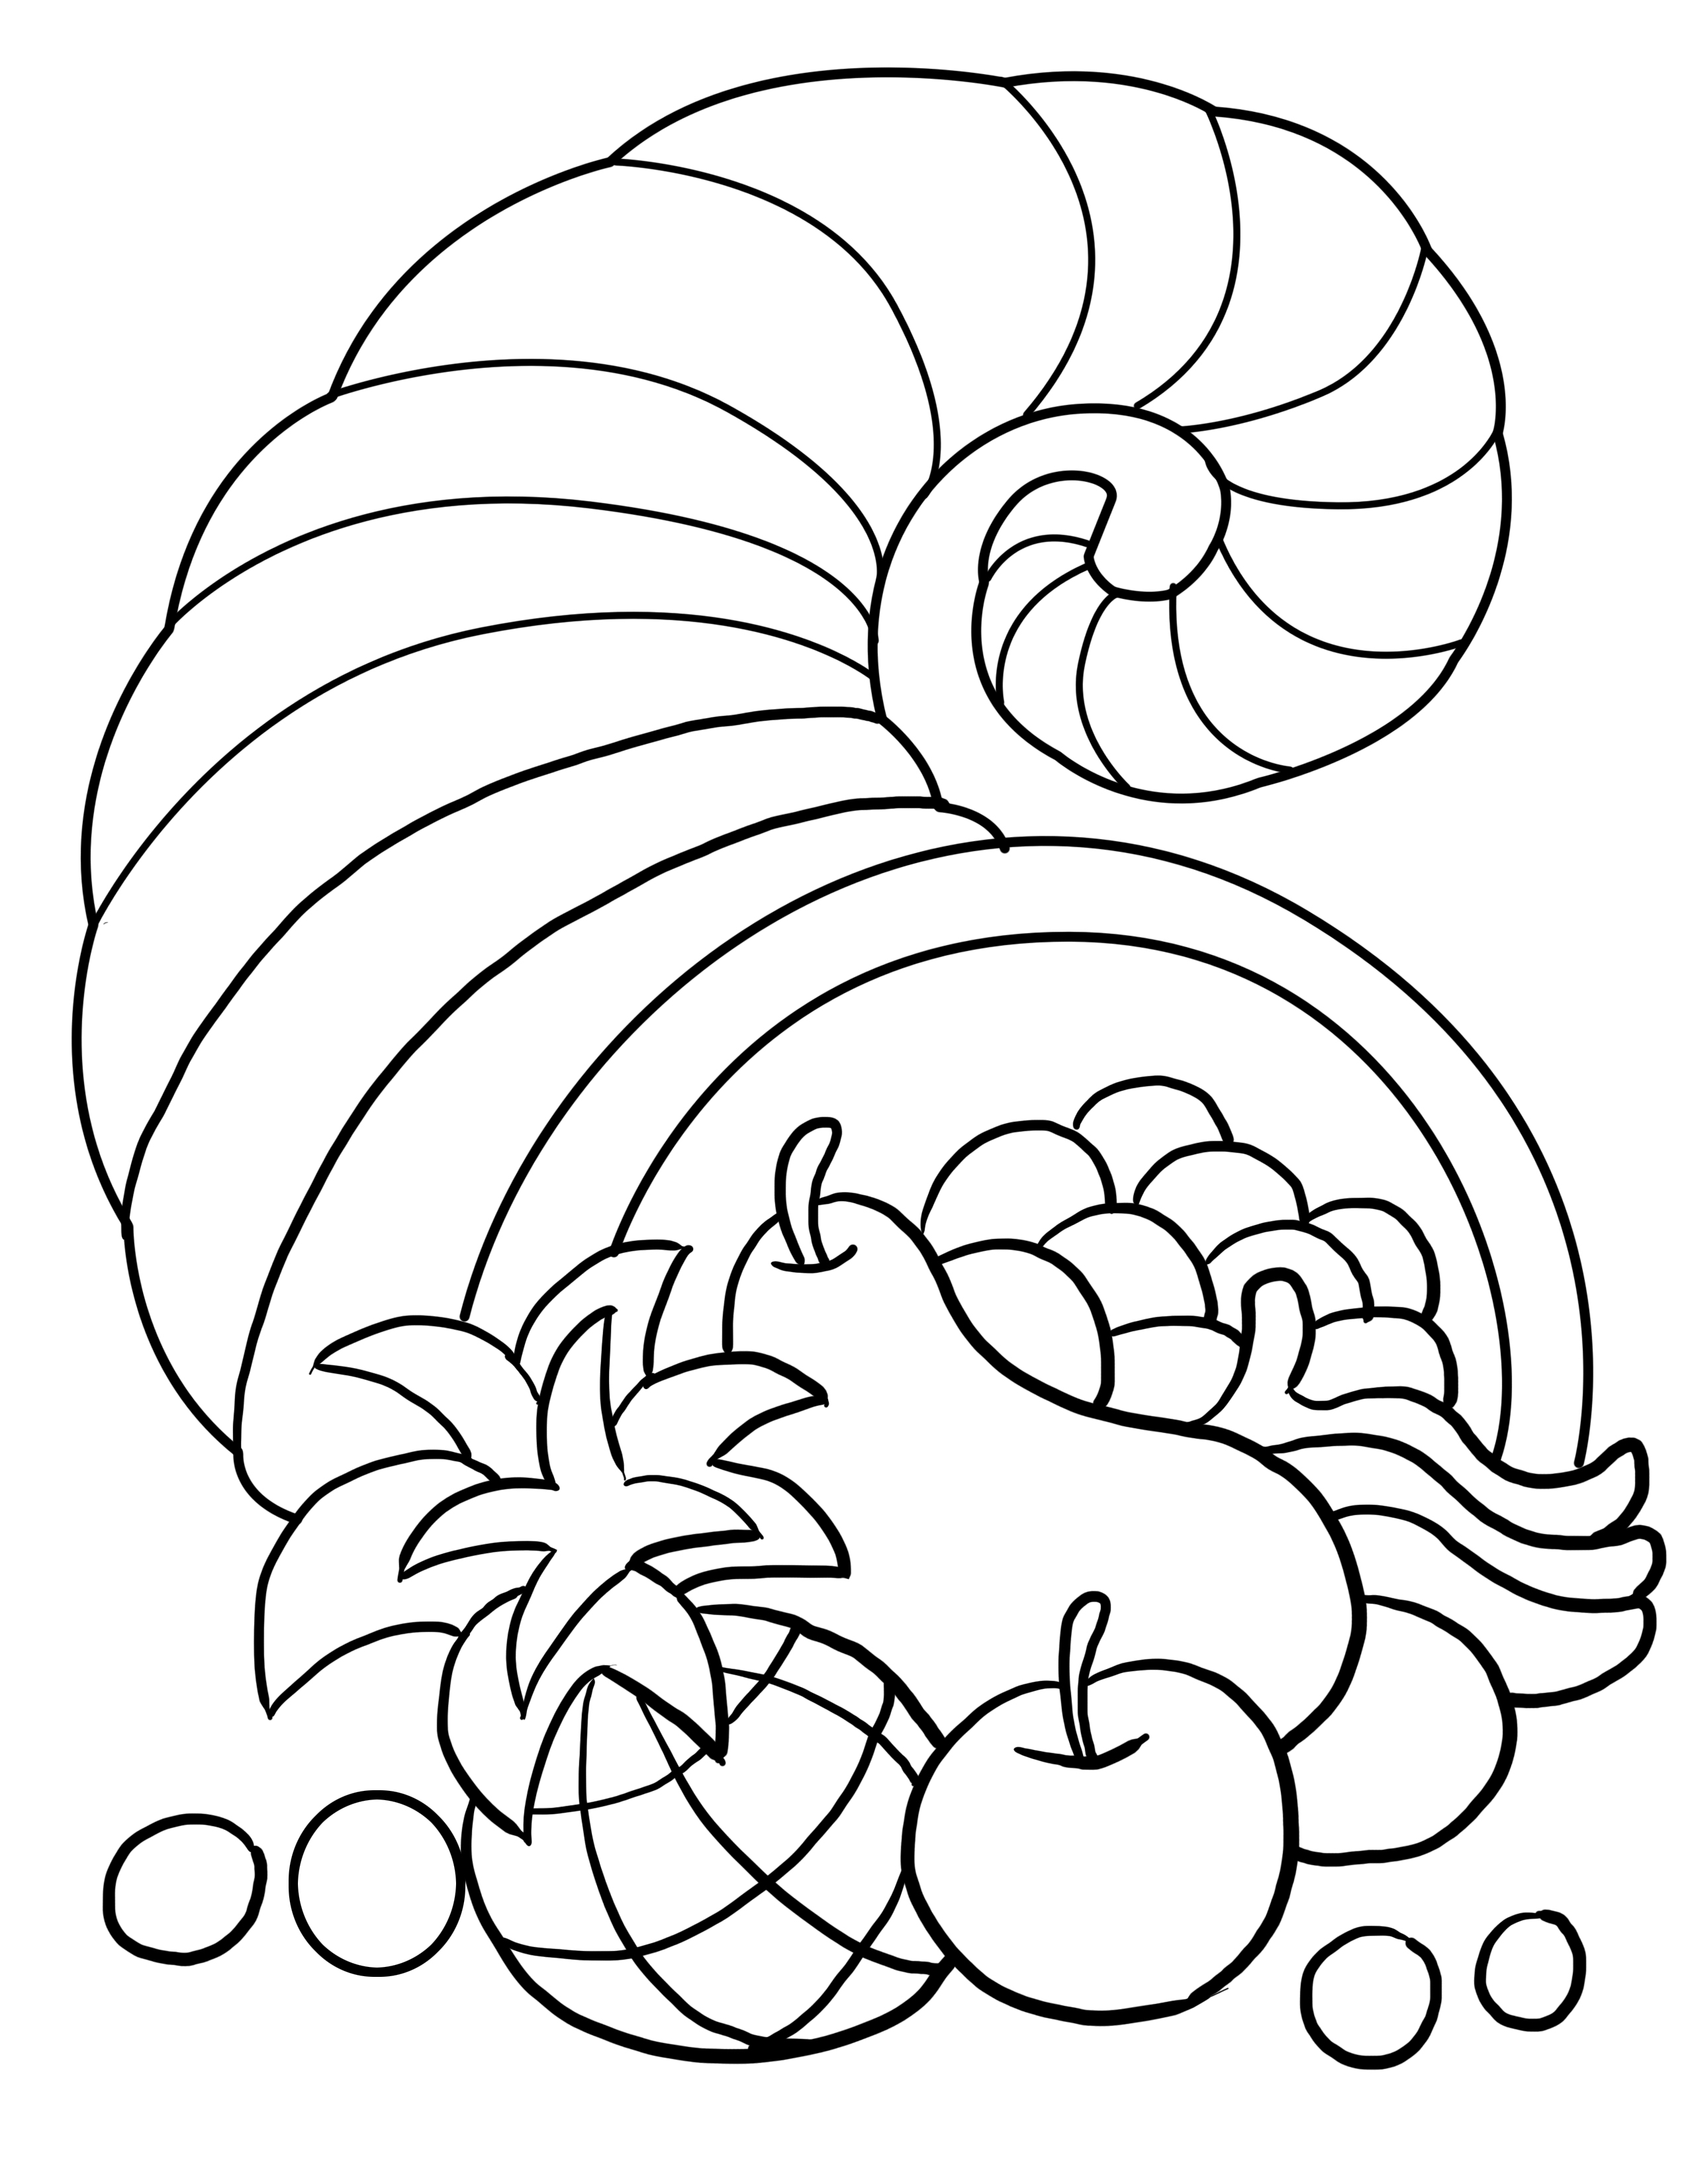 Printable Thanksgiving Coloring Pages ColoringMe com